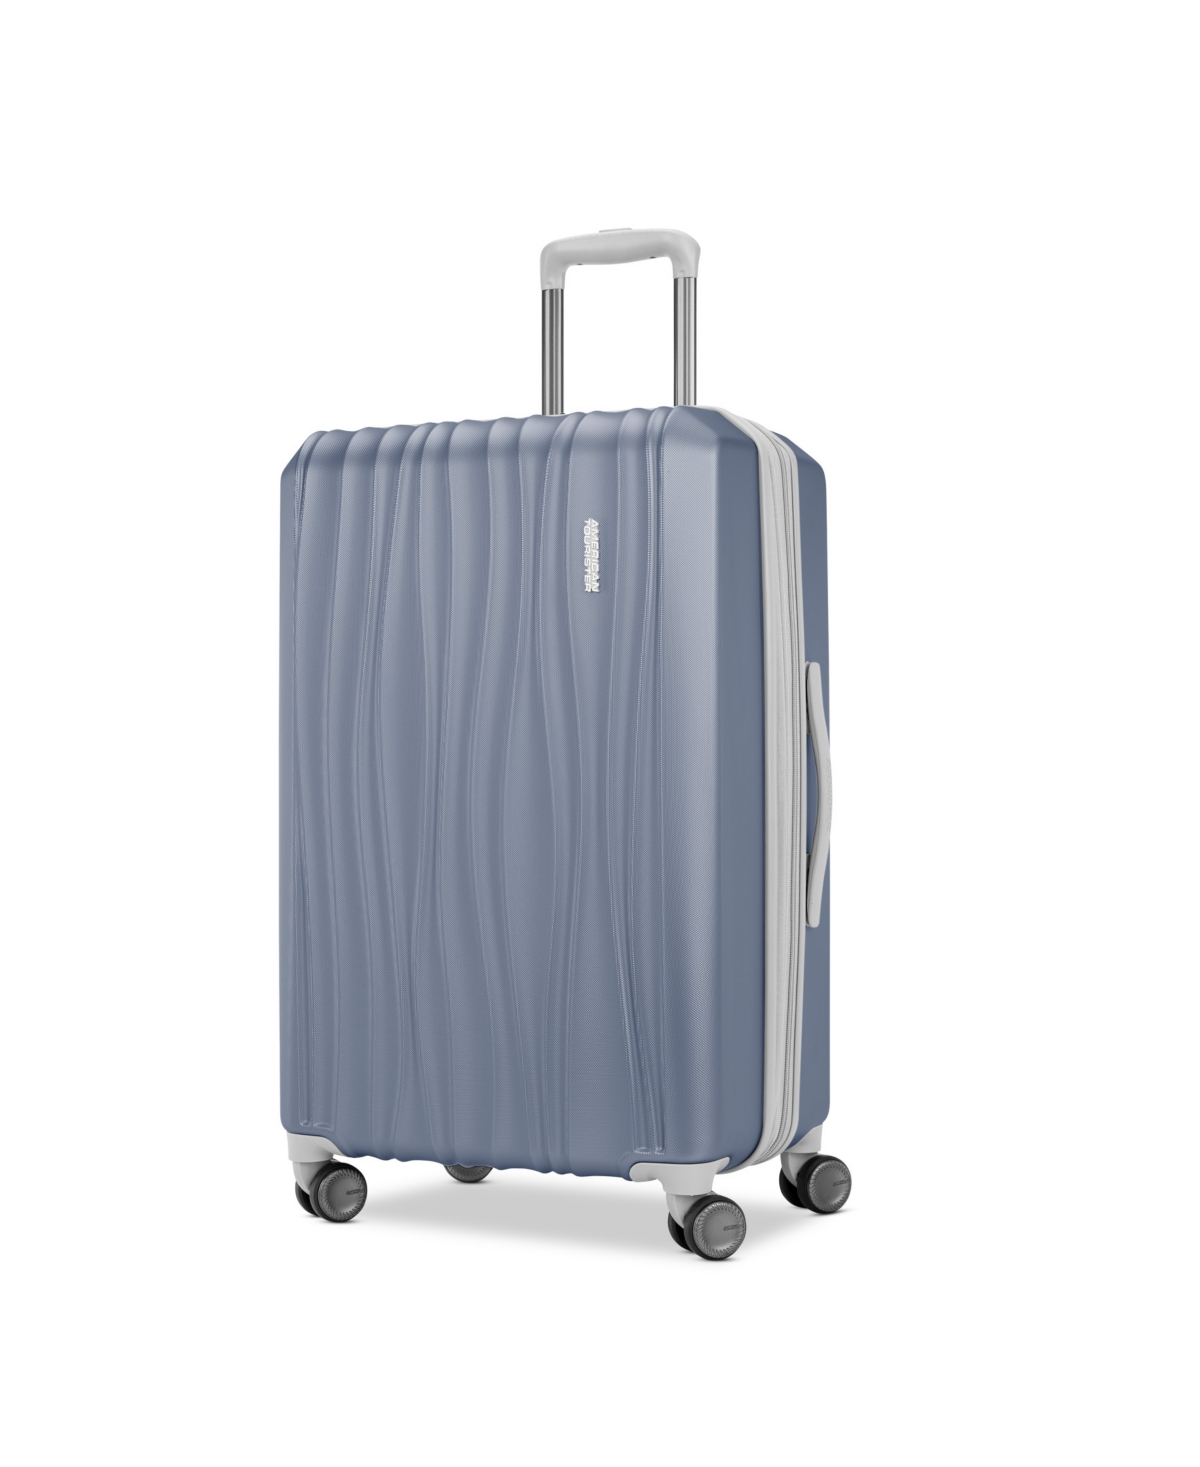 American Tourister Tribute Encore Hardside Check-in 24" Spinner Luggage In Slate Blue